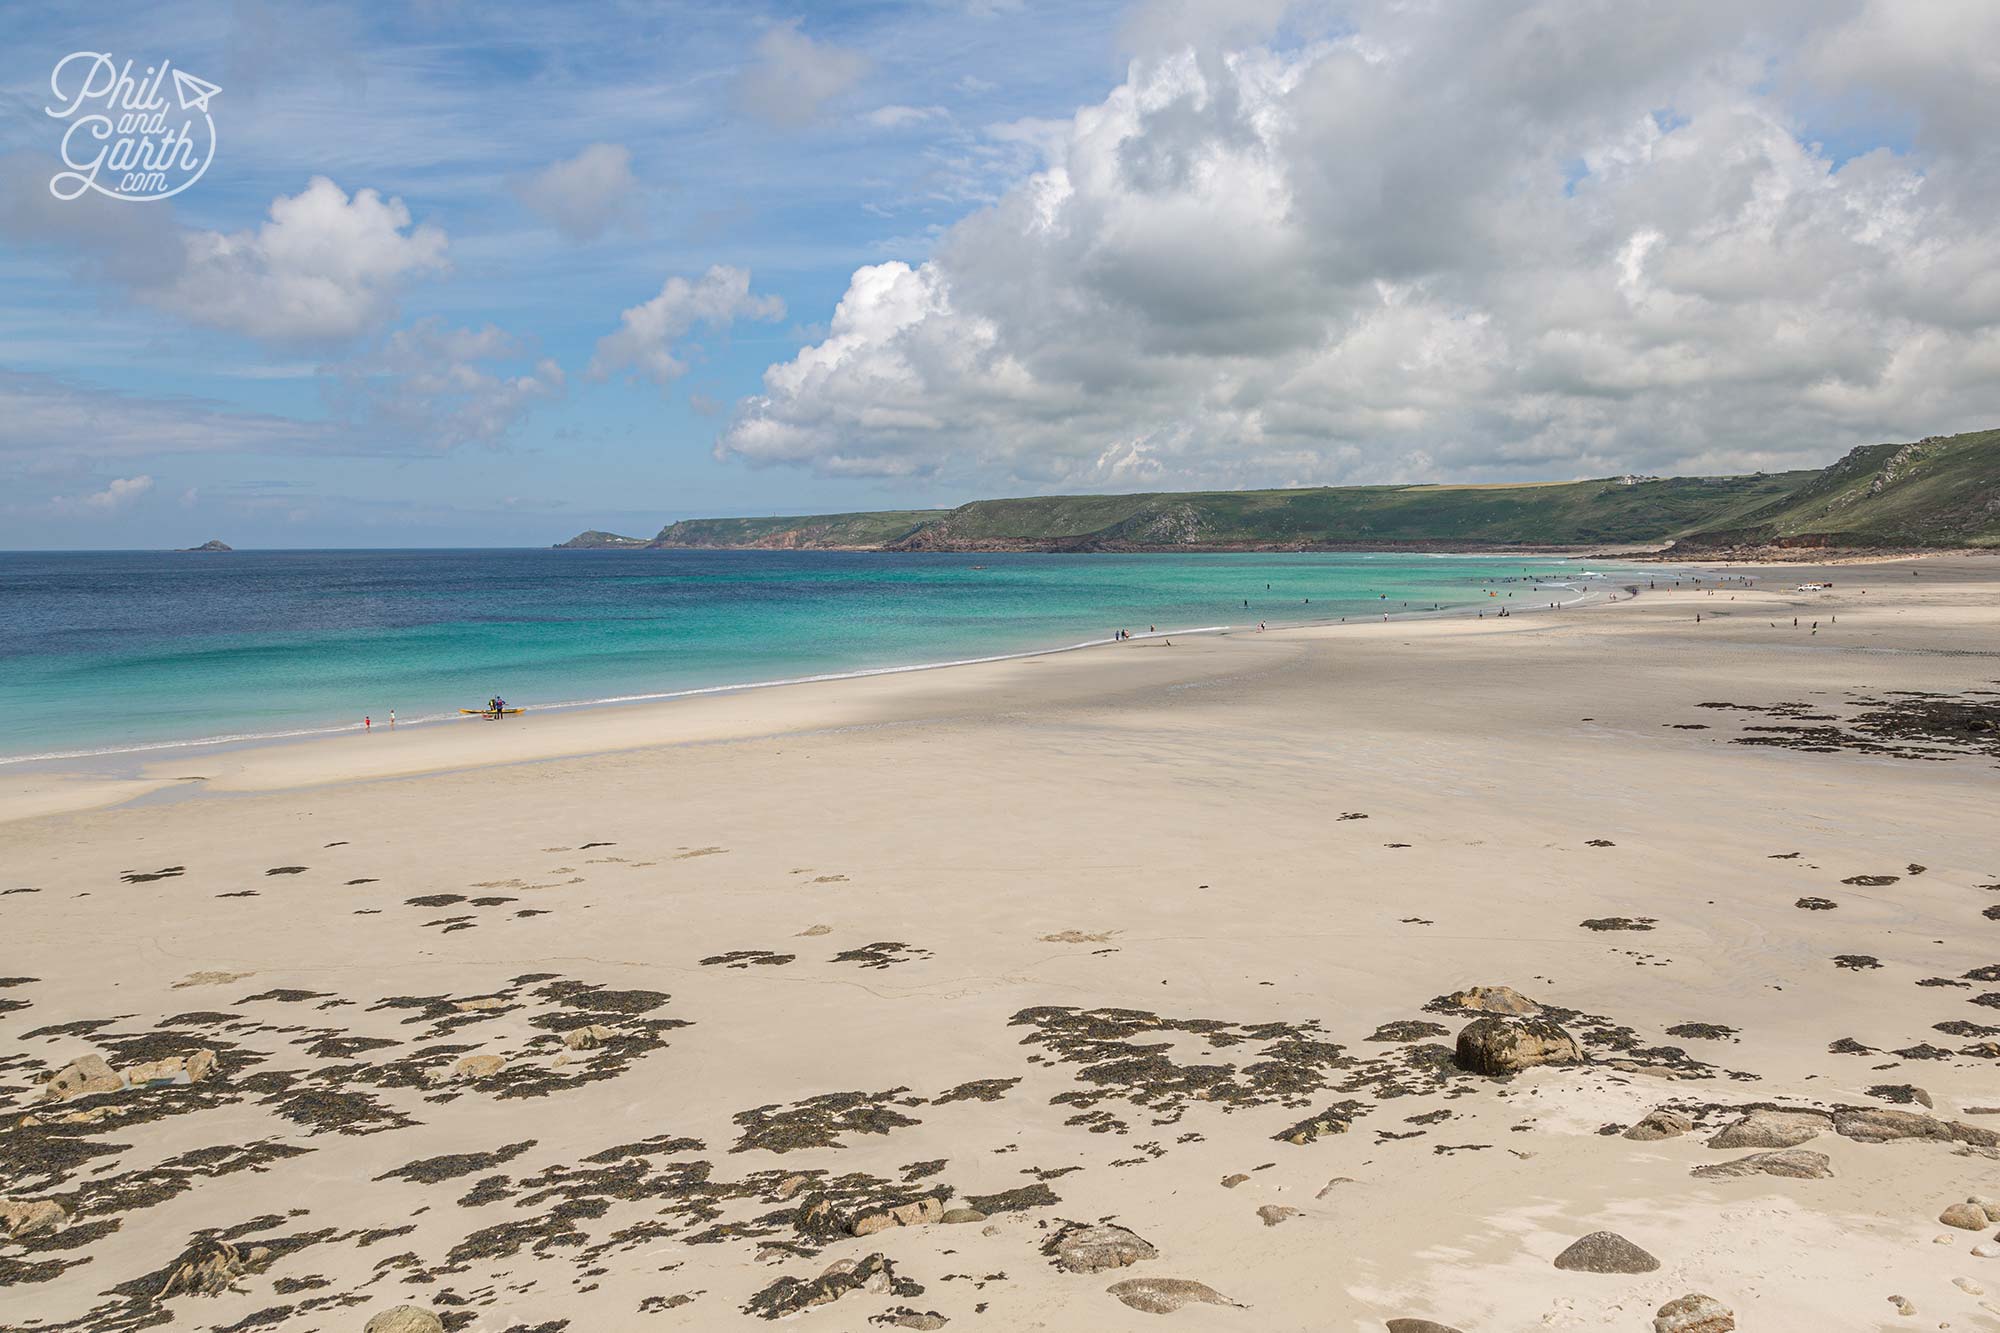 Sennen Cove is a gorgeous big beach so plenty of room for everyone